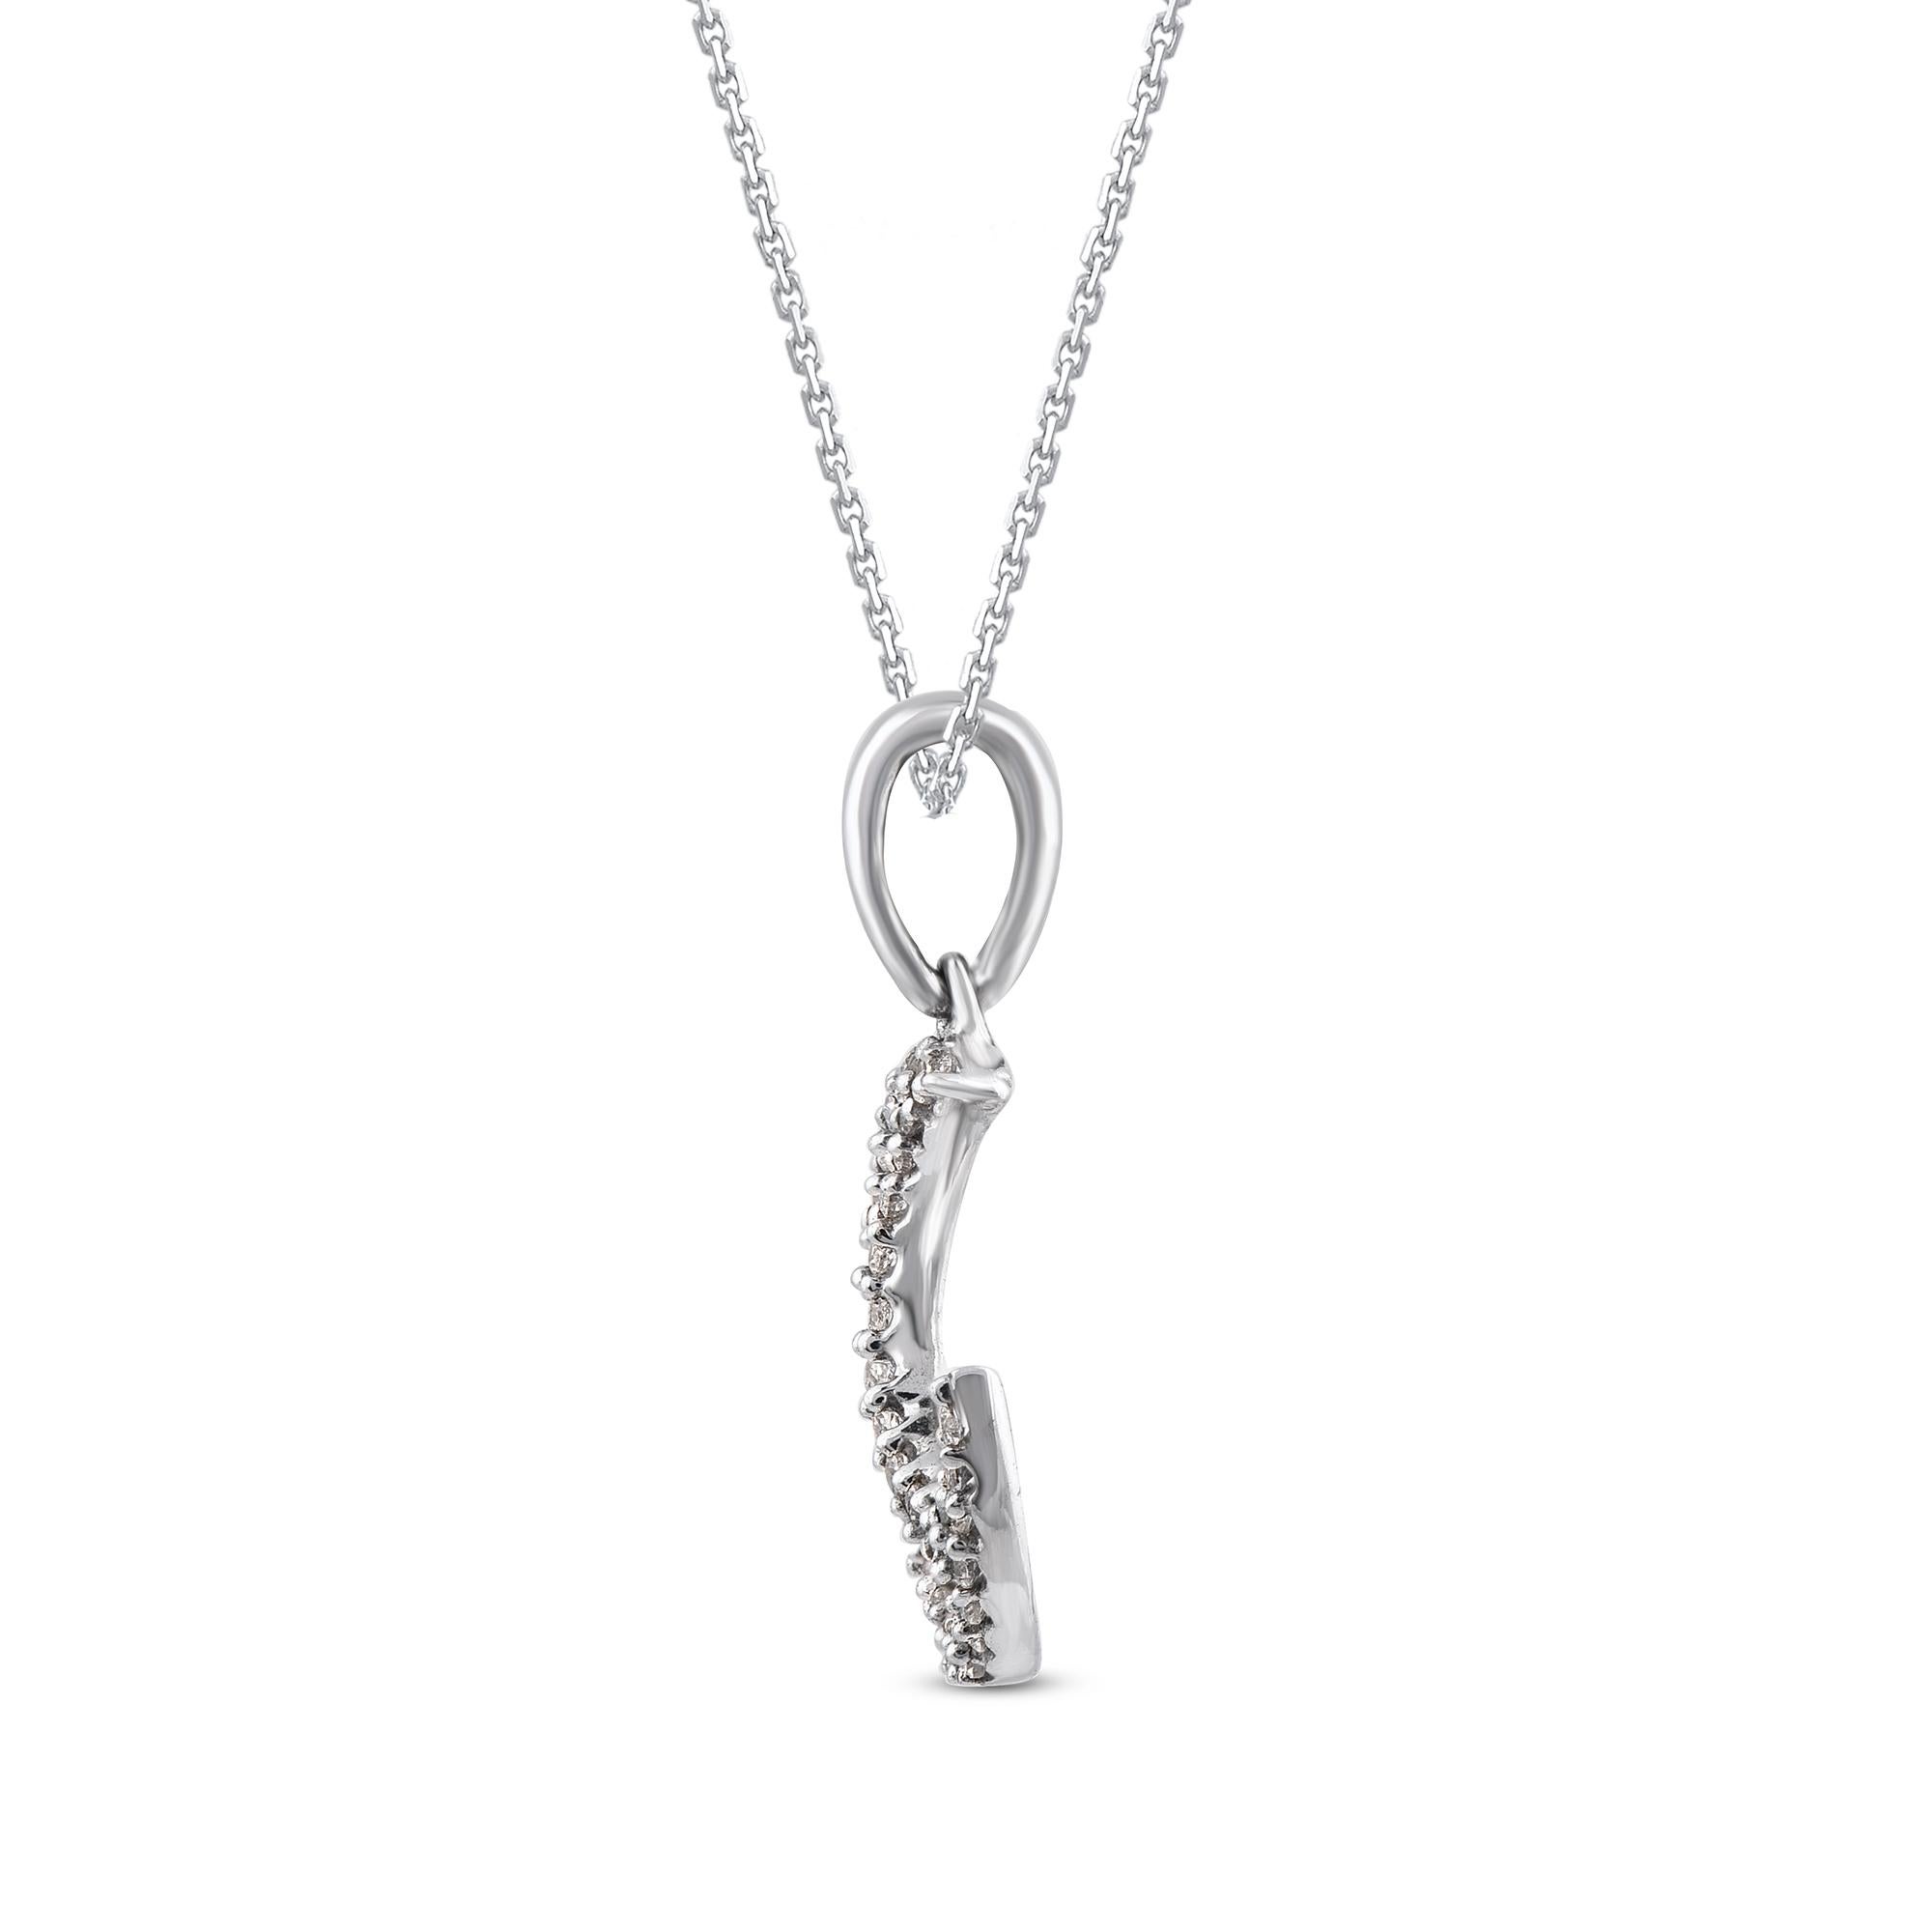 Complete your casual looks with this diamond moon pendant. Accentuated with 39 single cut round diamonds in prong setting and crafted by our skillful craftsmen in 14 karat white gold. The total diamond weight is 0.10 carat and shines in H-I color,